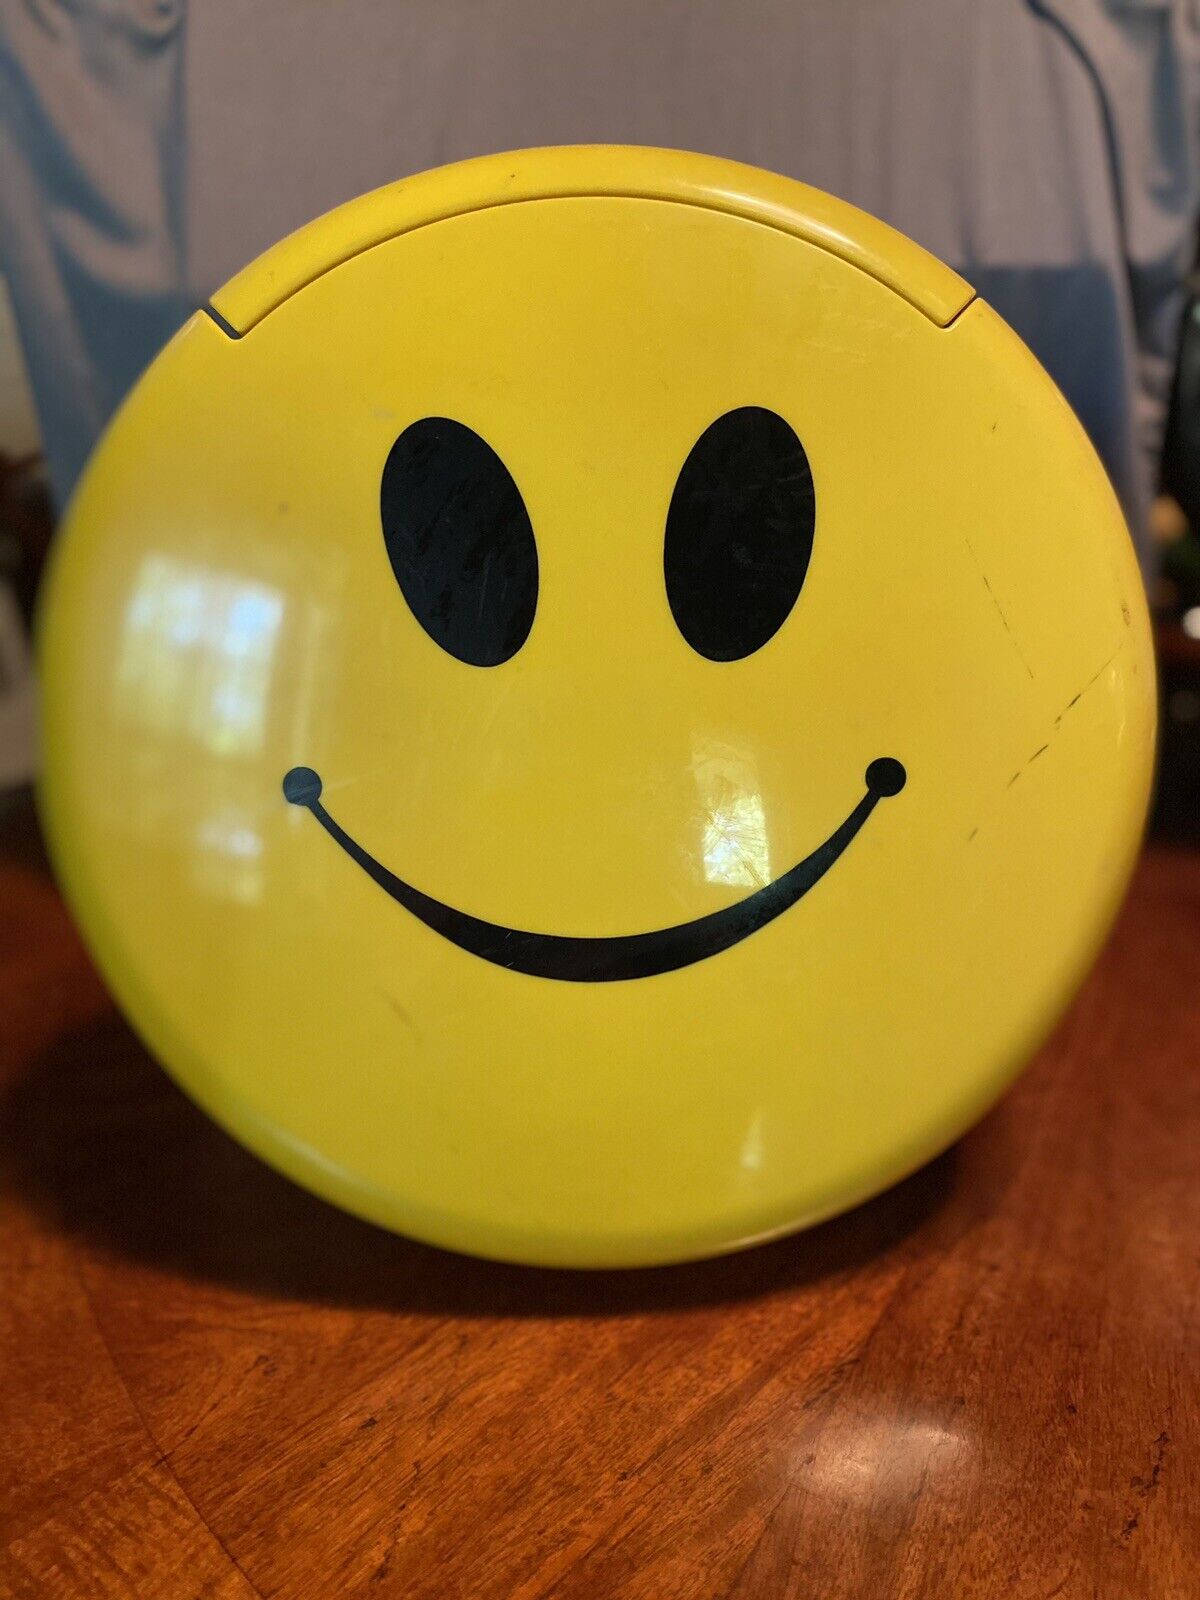 Vintage Telemania Happy Smiley Face Telephone Land Line 1990s